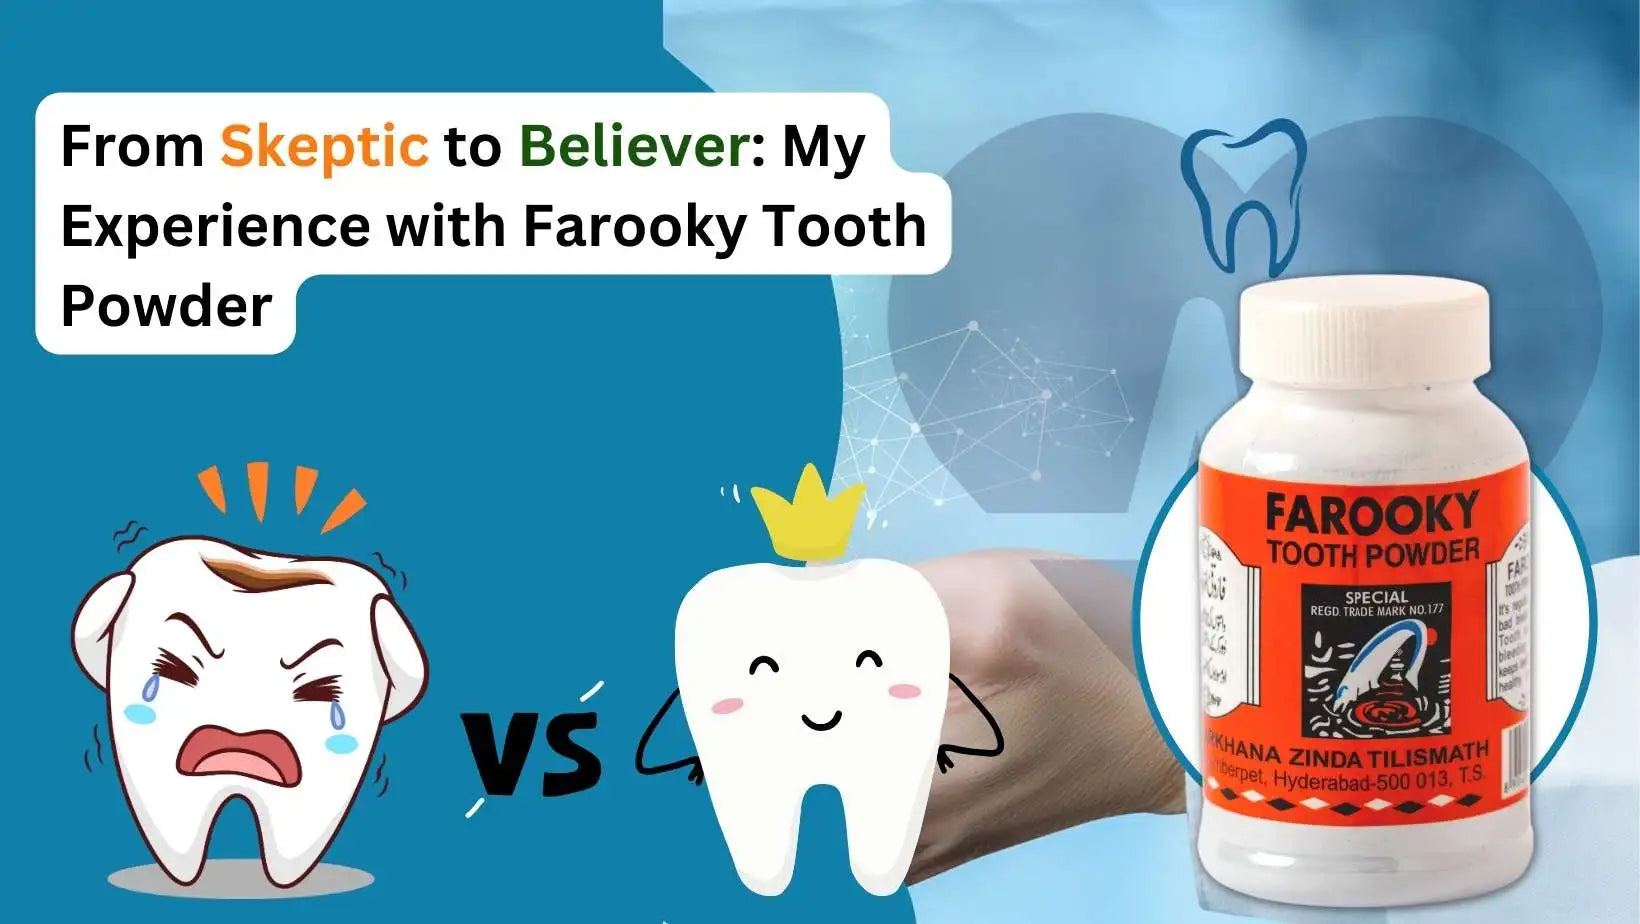 From Skeptic to Believer: My Experience with Farooky Tooth Powder